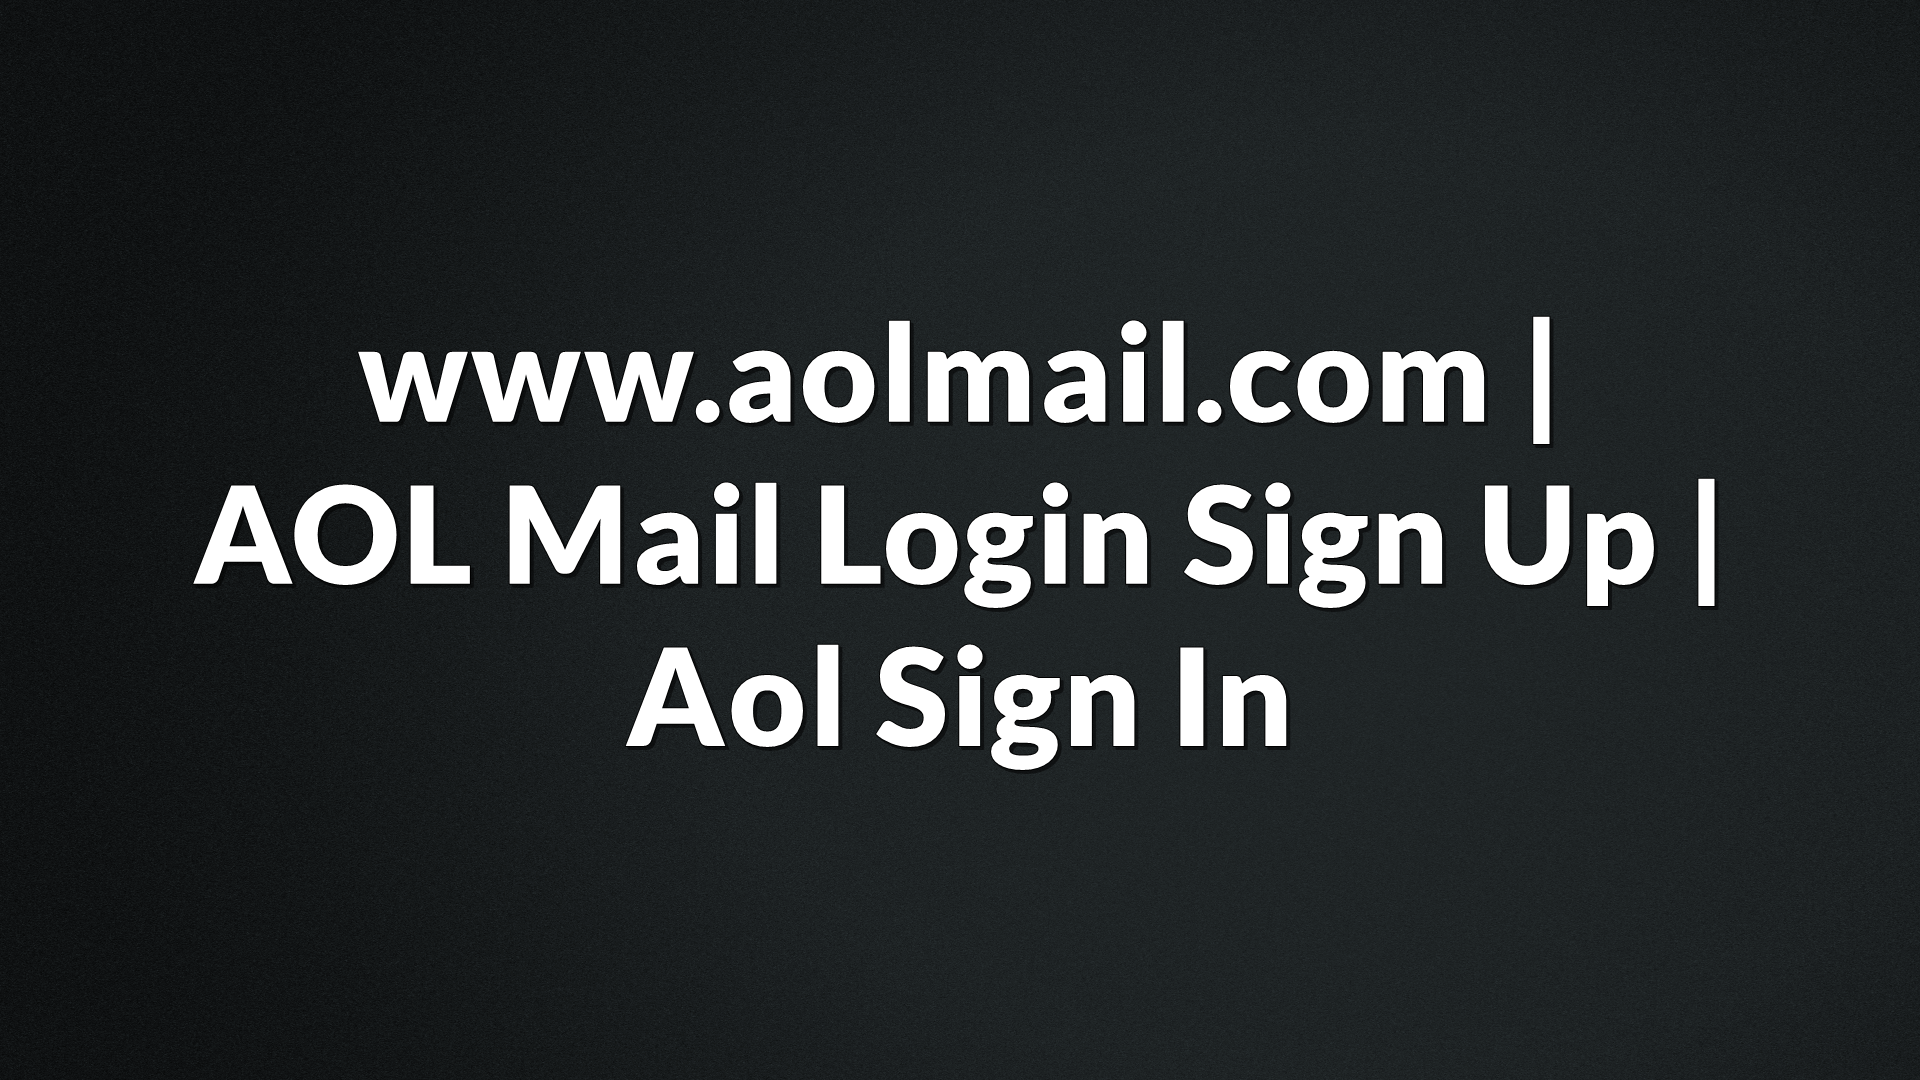 www.aolmail.com AOL Mail Login Sign Up - Aol Sign In